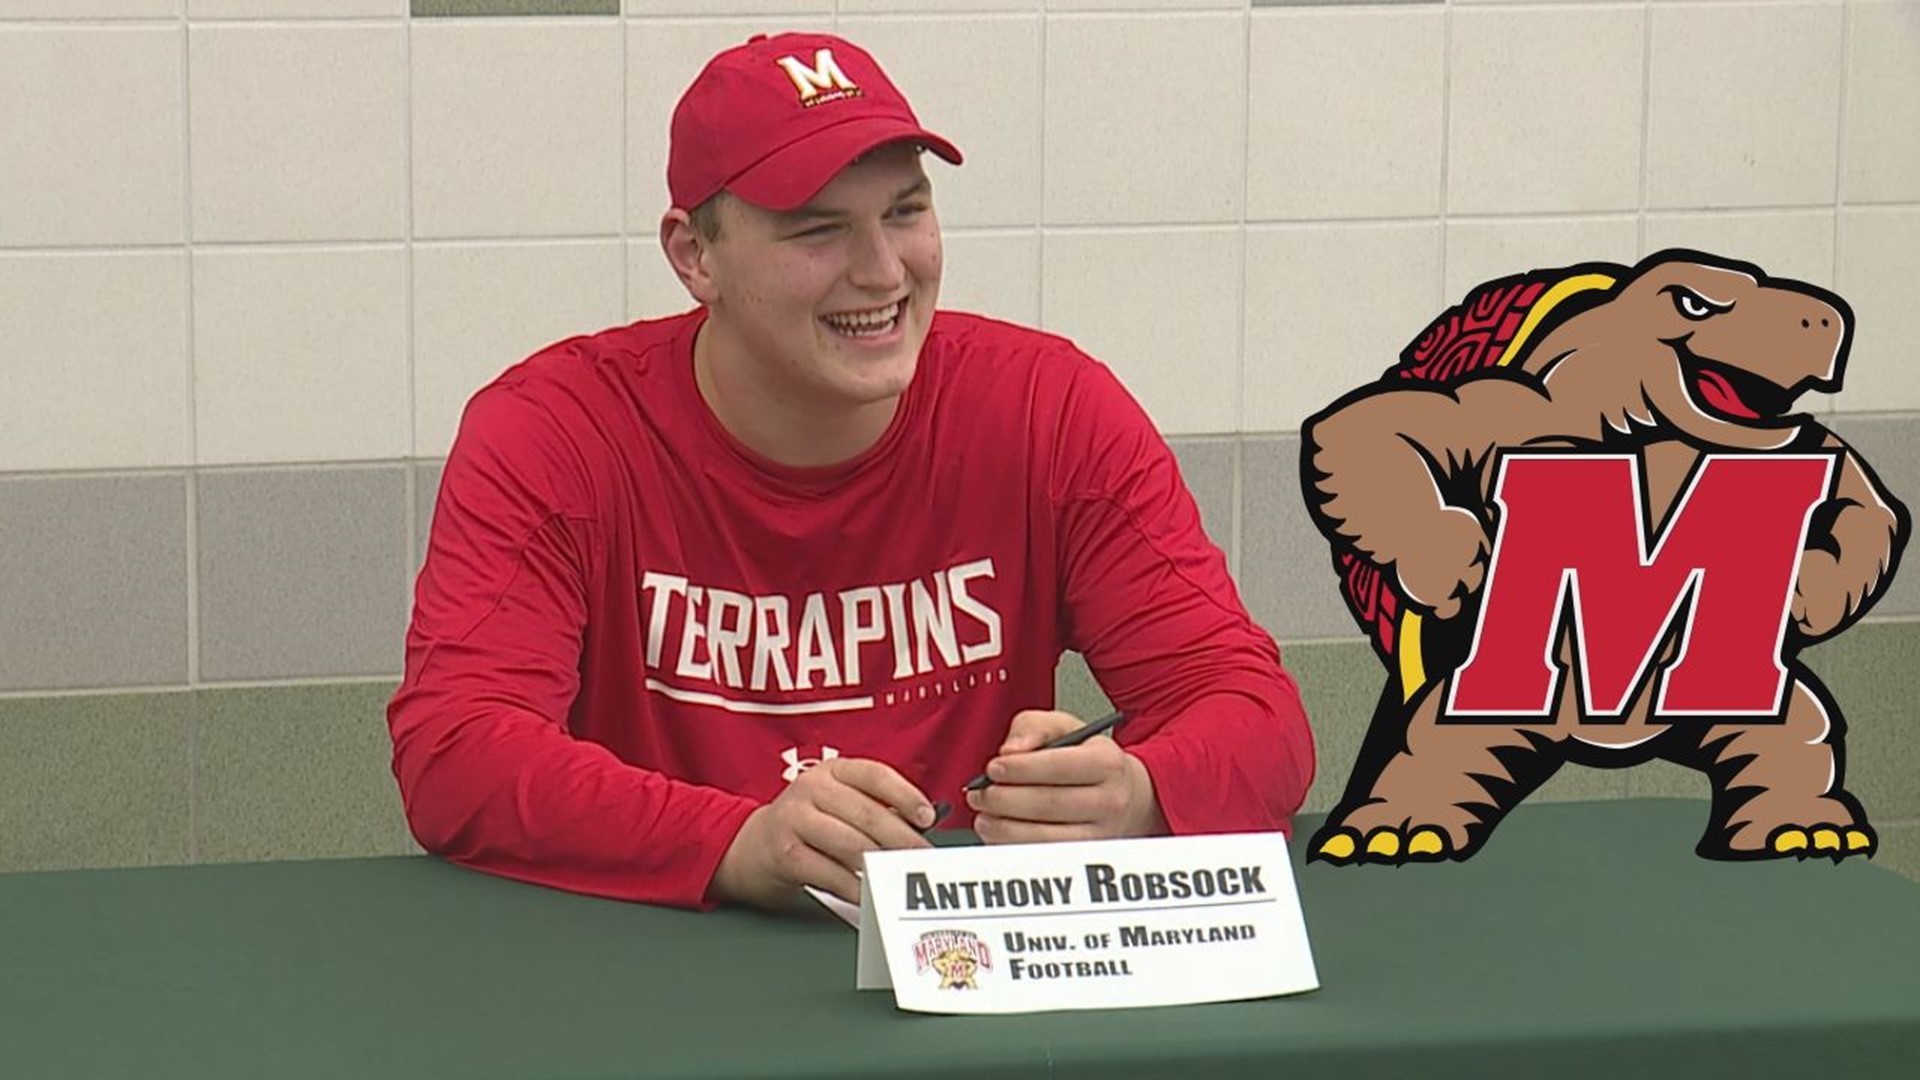 The Central Dauphin lineman was all smiles as he joined the Terrapins' family.